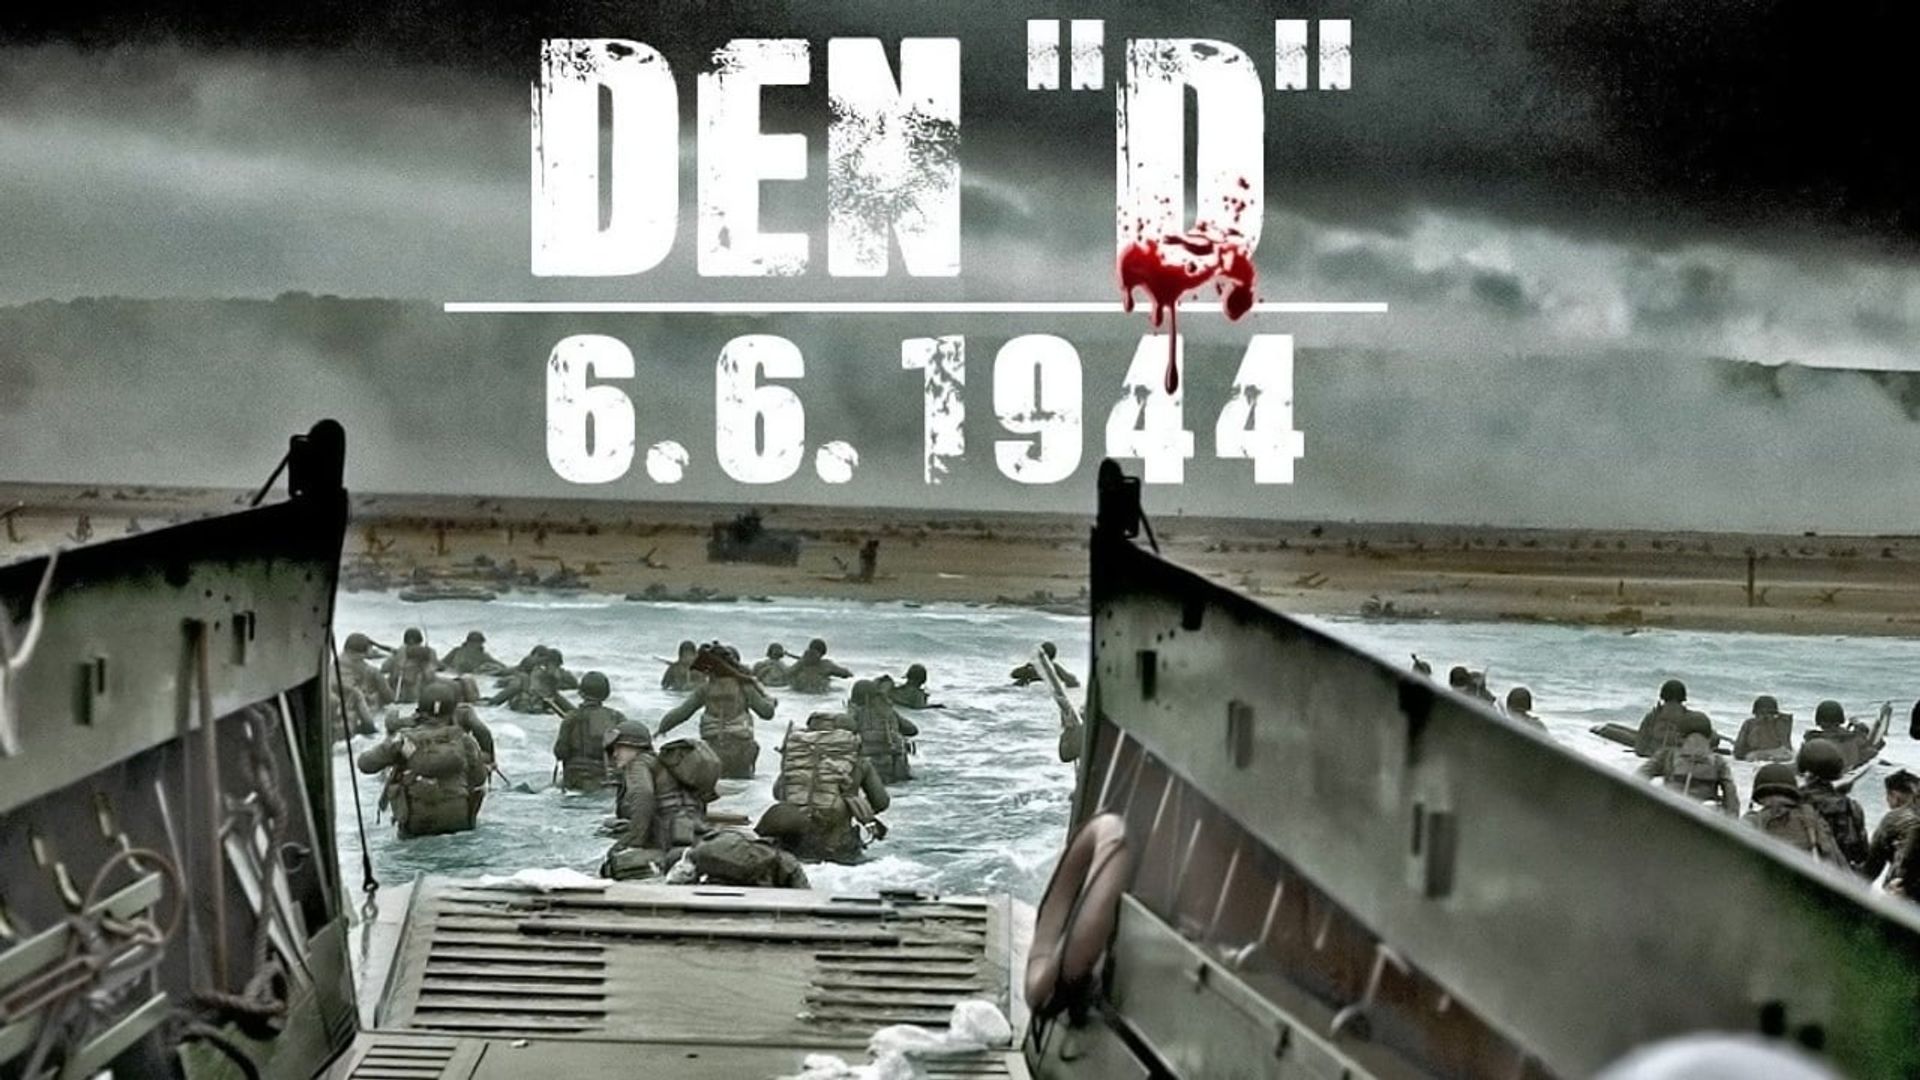 D-Day 6.6.1944 Backdrop